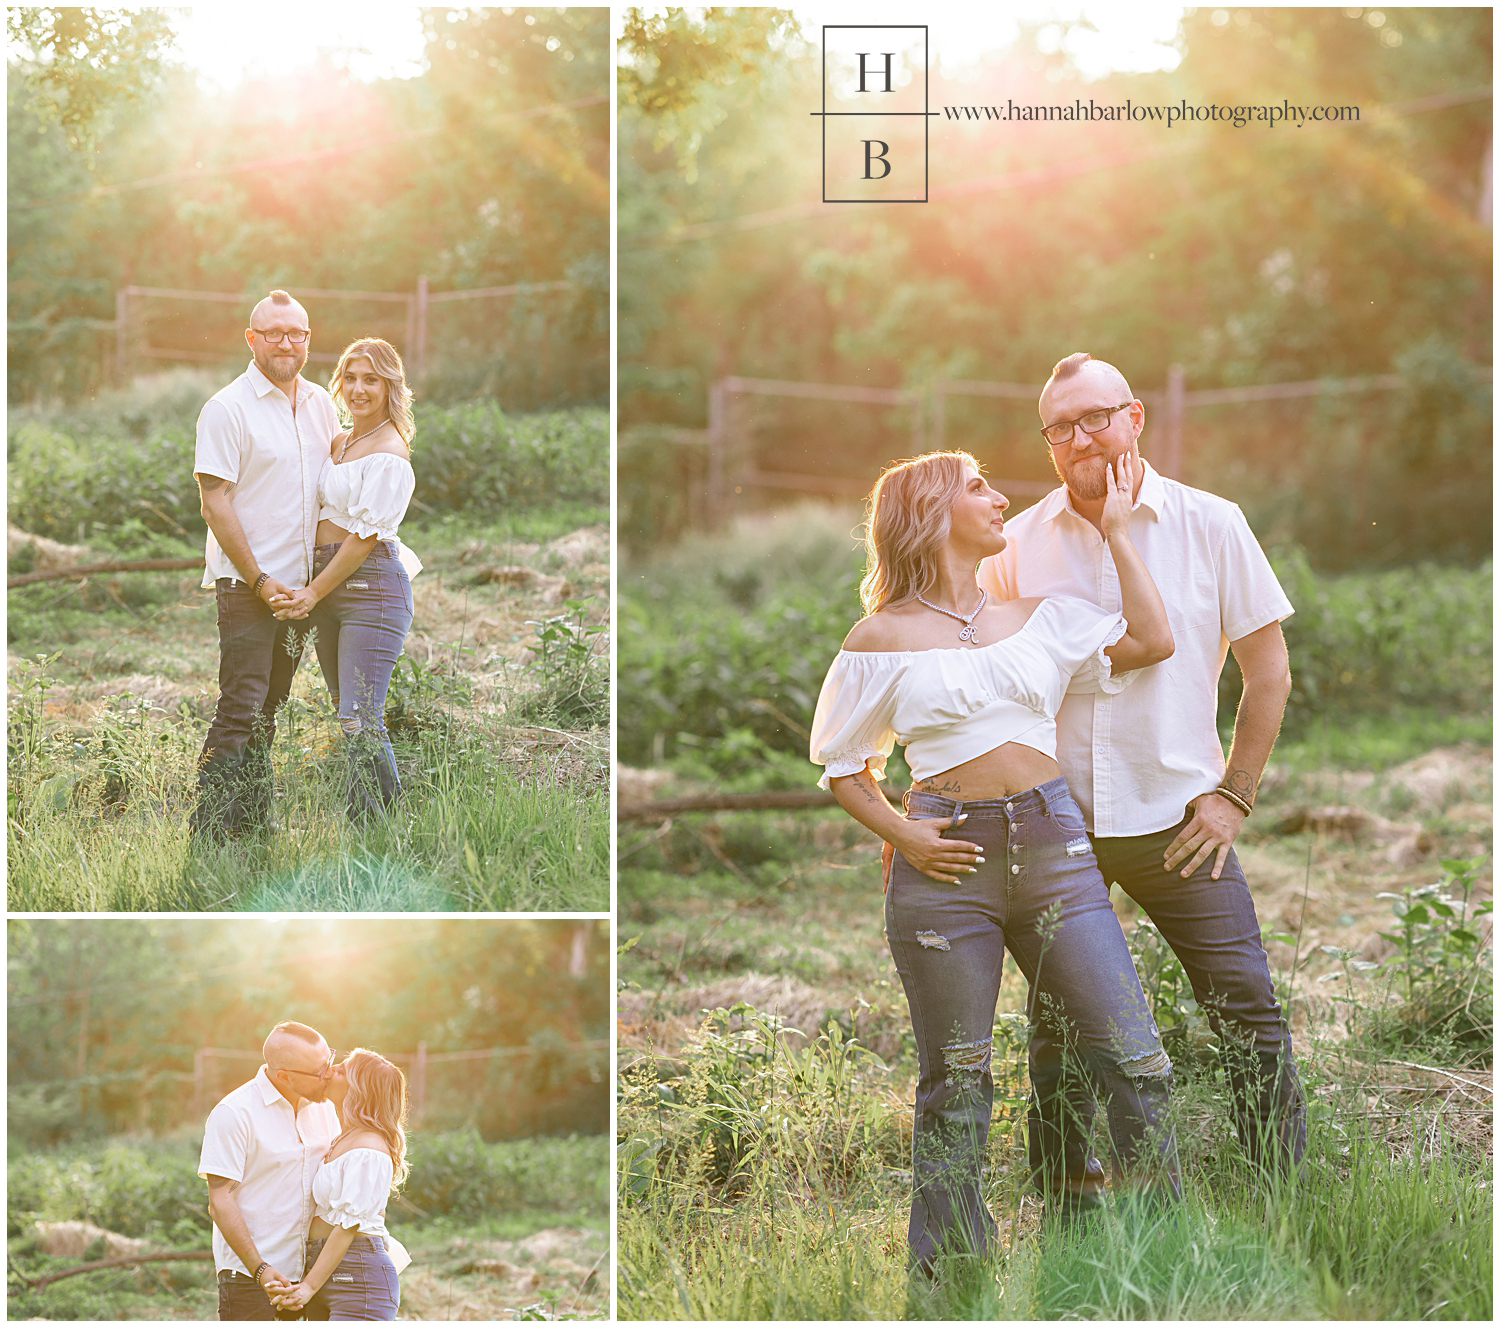 Lady in white silk crop top poses with fiance in a field during golden hour.